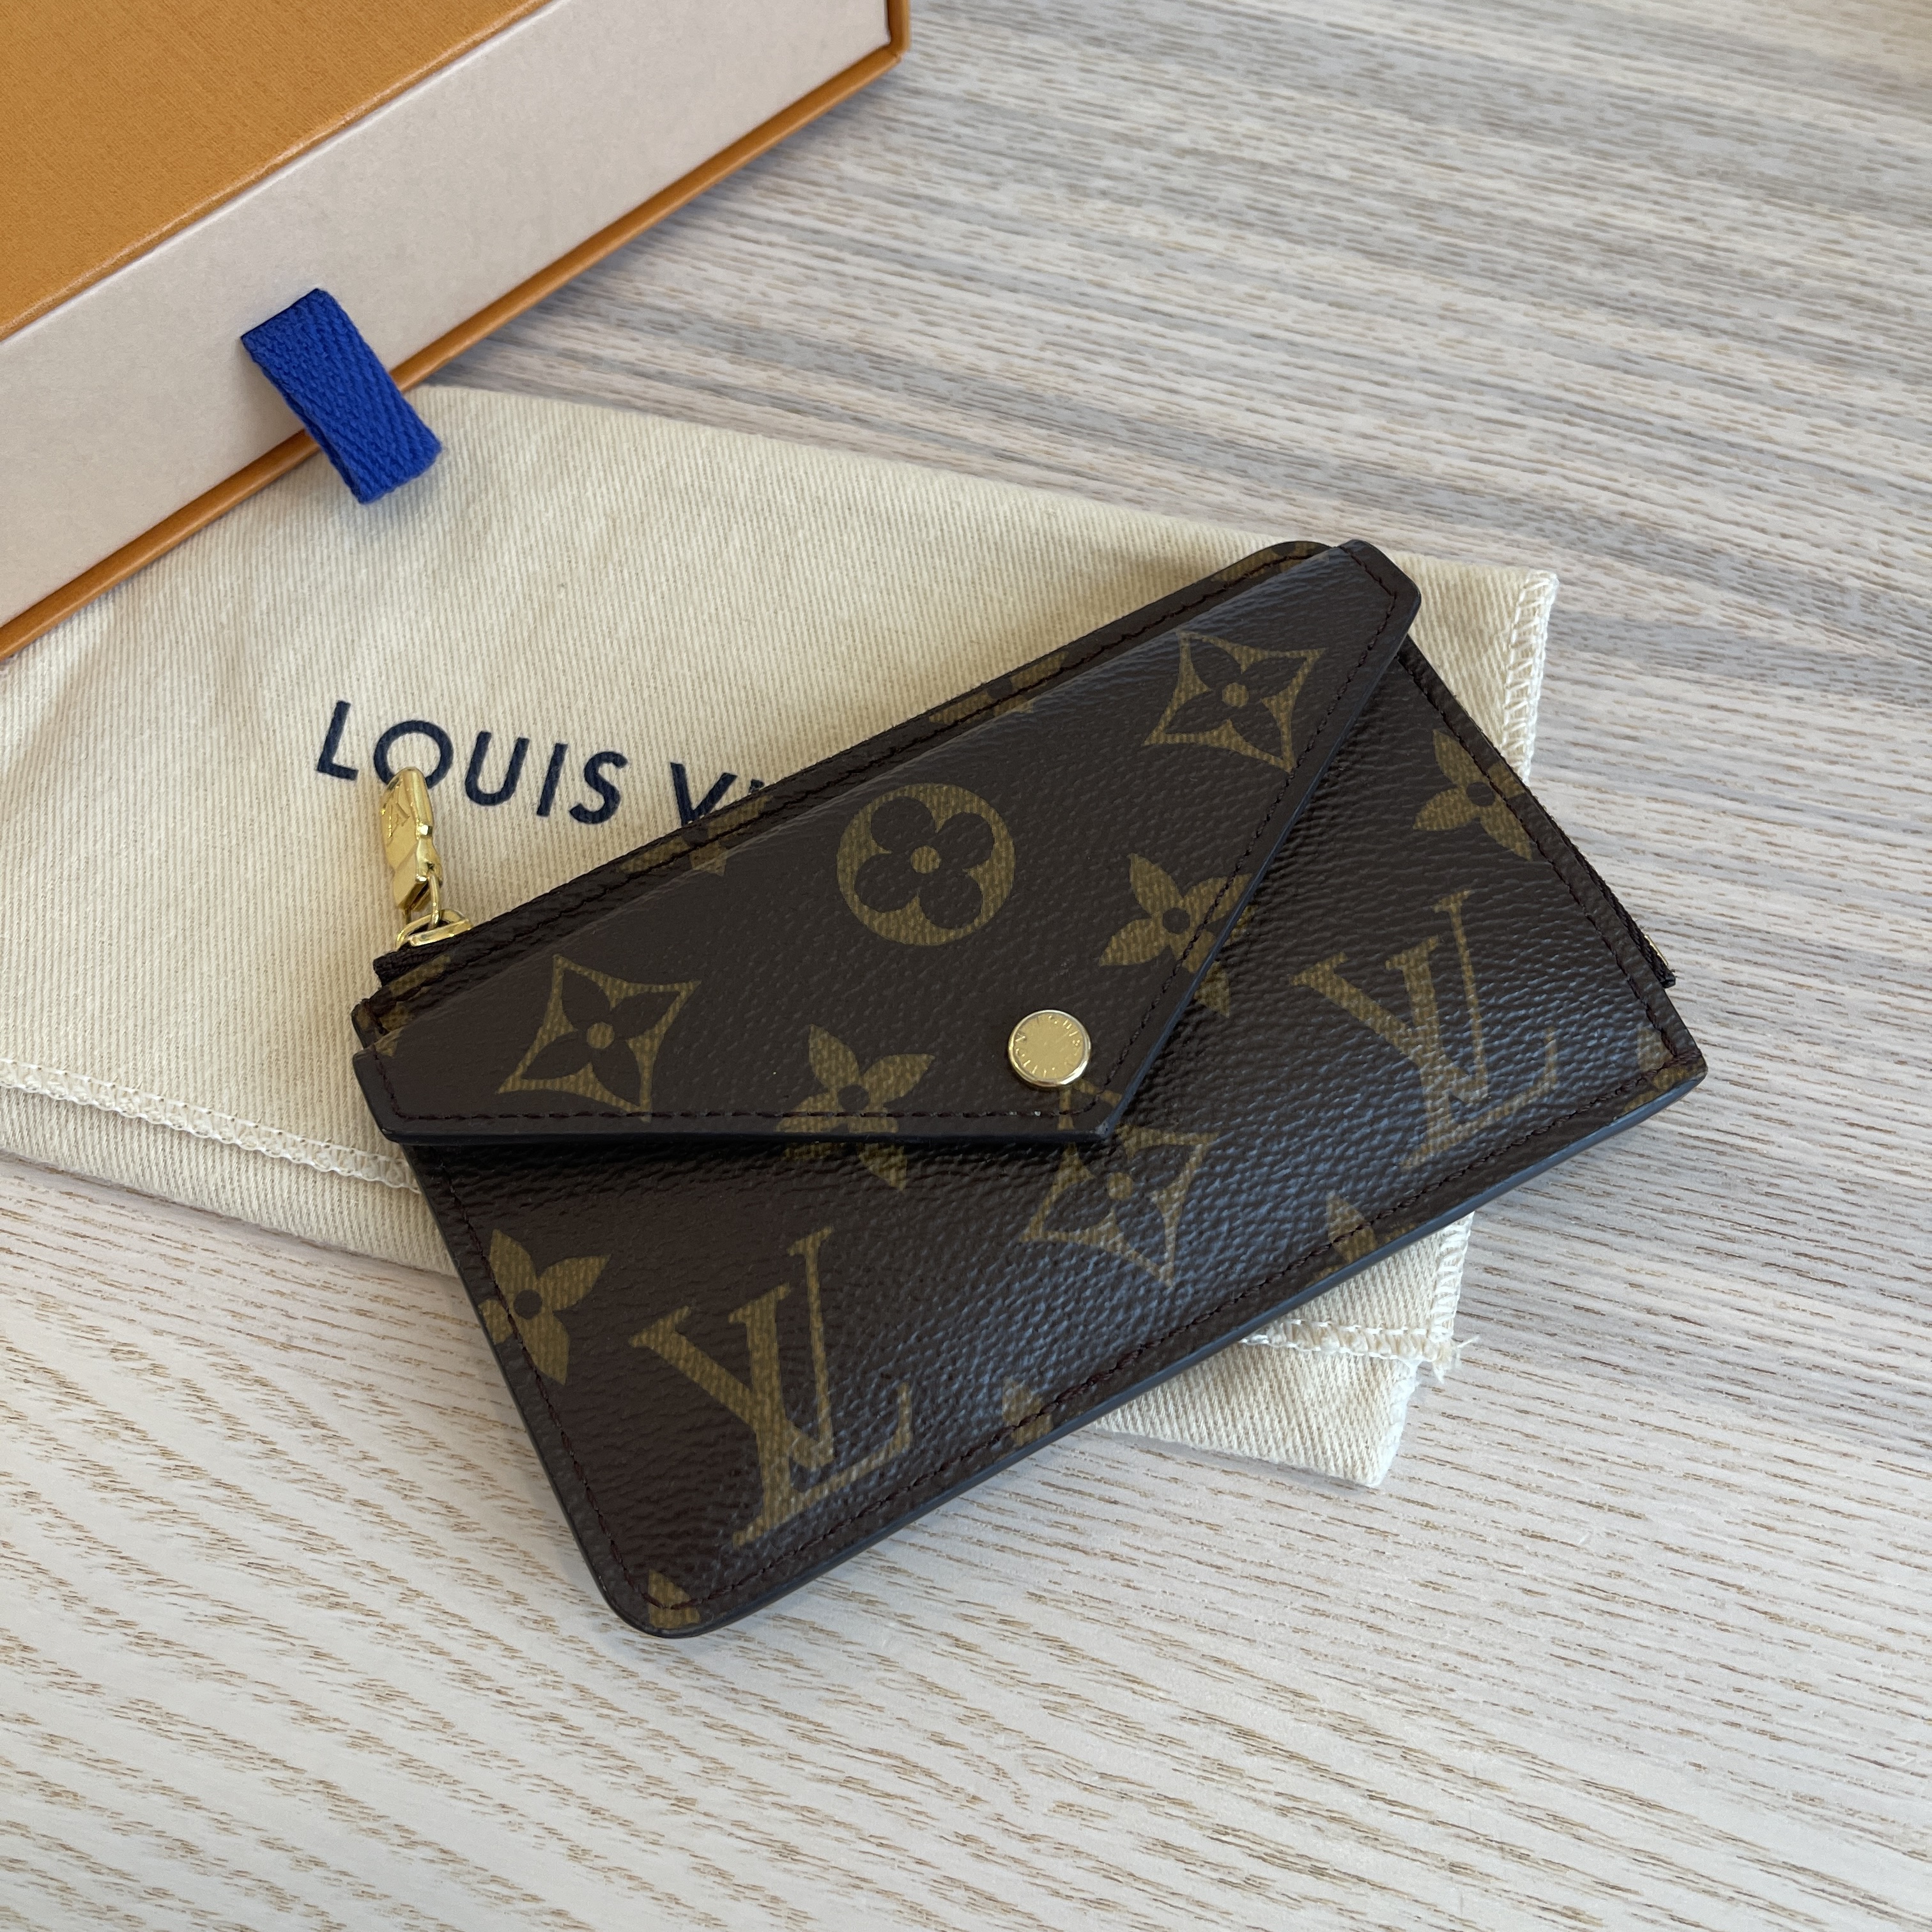 NEW AUTHENTIC LOUIS VUITTON CARD HOLDER RECTO VERSO WALLET MONOGRAM SOLD  OUT!